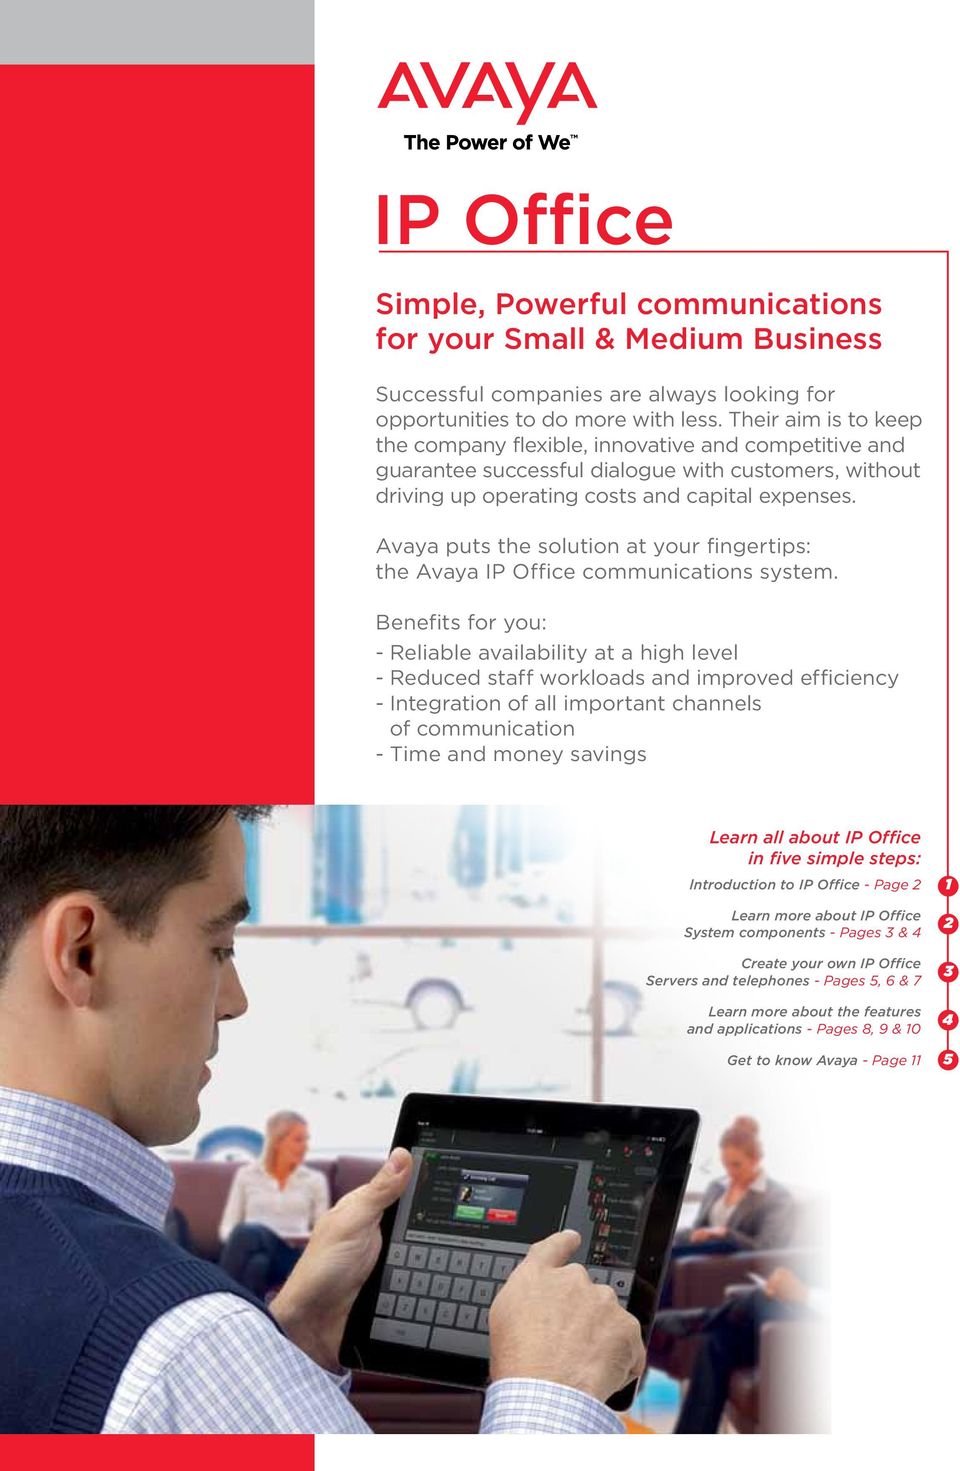 Avaya puts the solution at your fingertips: the Avaya IP Office communications system.